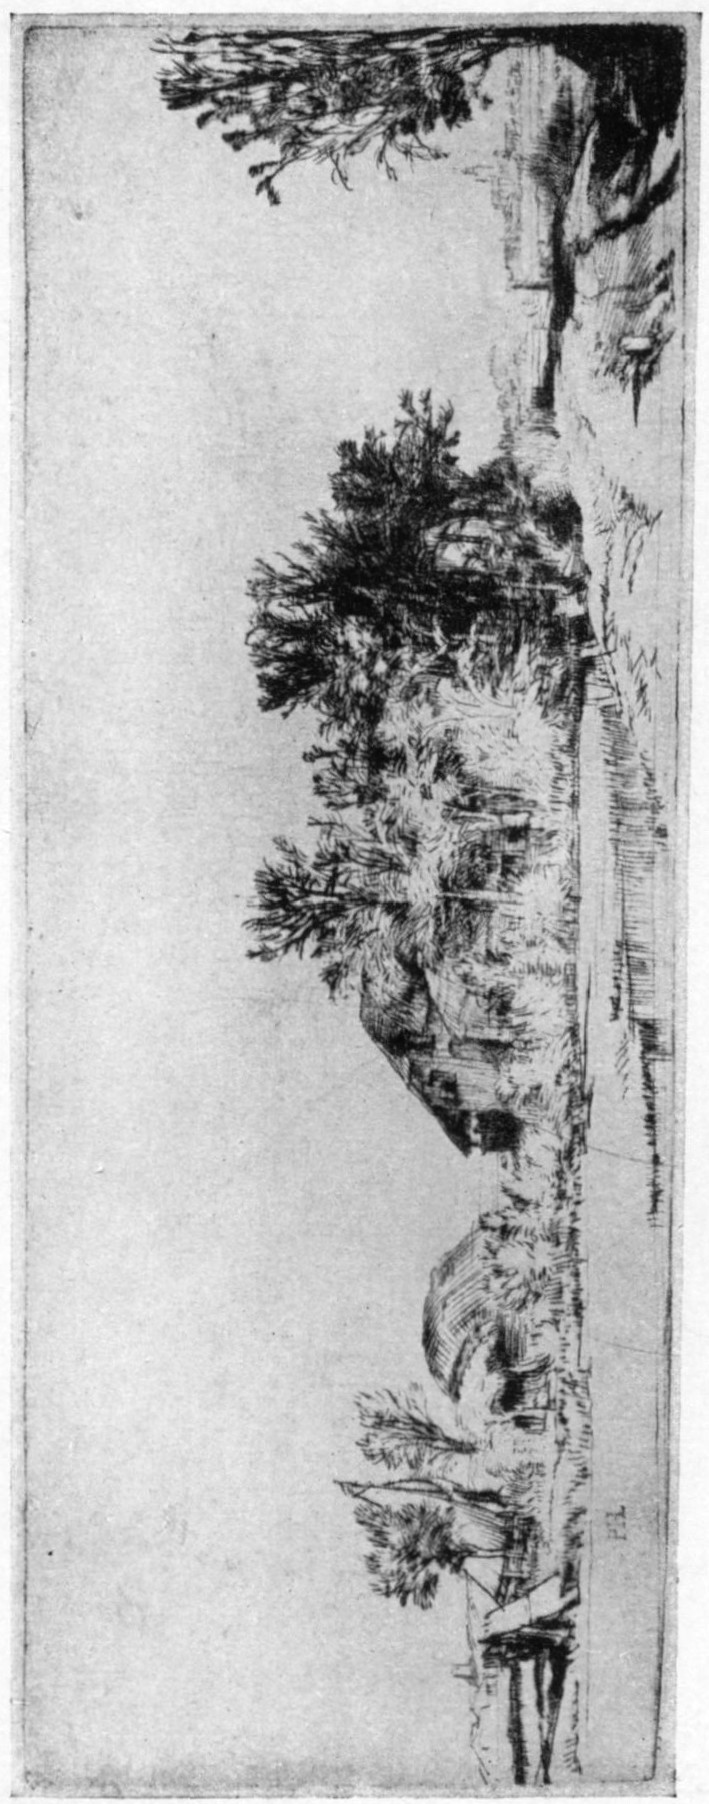 264. LANDSCAPE WITH A ROAD BESIDE A CANAL. 1652. B. 221